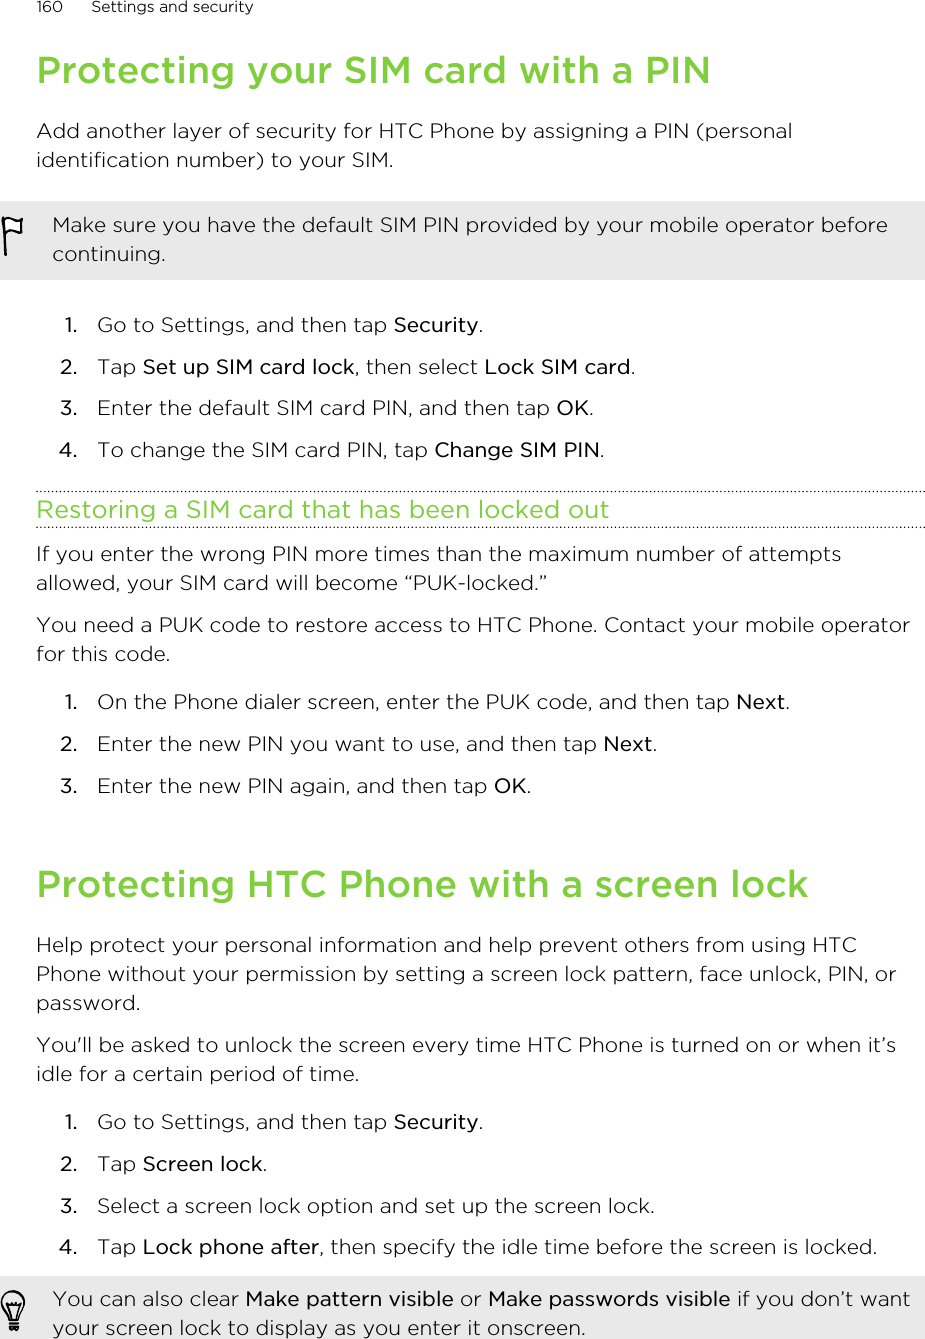 Protecting your SIM card with a PINAdd another layer of security for HTC Phone by assigning a PIN (personalidentification number) to your SIM.Make sure you have the default SIM PIN provided by your mobile operator beforecontinuing.1. Go to Settings, and then tap Security.2. Tap Set up SIM card lock, then select Lock SIM card.3. Enter the default SIM card PIN, and then tap OK.4. To change the SIM card PIN, tap Change SIM PIN.Restoring a SIM card that has been locked outIf you enter the wrong PIN more times than the maximum number of attemptsallowed, your SIM card will become “PUK-locked.”You need a PUK code to restore access to HTC Phone. Contact your mobile operatorfor this code.1. On the Phone dialer screen, enter the PUK code, and then tap Next.2. Enter the new PIN you want to use, and then tap Next.3. Enter the new PIN again, and then tap OK.Protecting HTC Phone with a screen lockHelp protect your personal information and help prevent others from using HTCPhone without your permission by setting a screen lock pattern, face unlock, PIN, orpassword.You&apos;ll be asked to unlock the screen every time HTC Phone is turned on or when it’sidle for a certain period of time.1. Go to Settings, and then tap Security.2. Tap Screen lock.3. Select a screen lock option and set up the screen lock.4. Tap Lock phone after, then specify the idle time before the screen is locked. You can also clear Make pattern visible or Make passwords visible if you don’t wantyour screen lock to display as you enter it onscreen.160 Settings and security